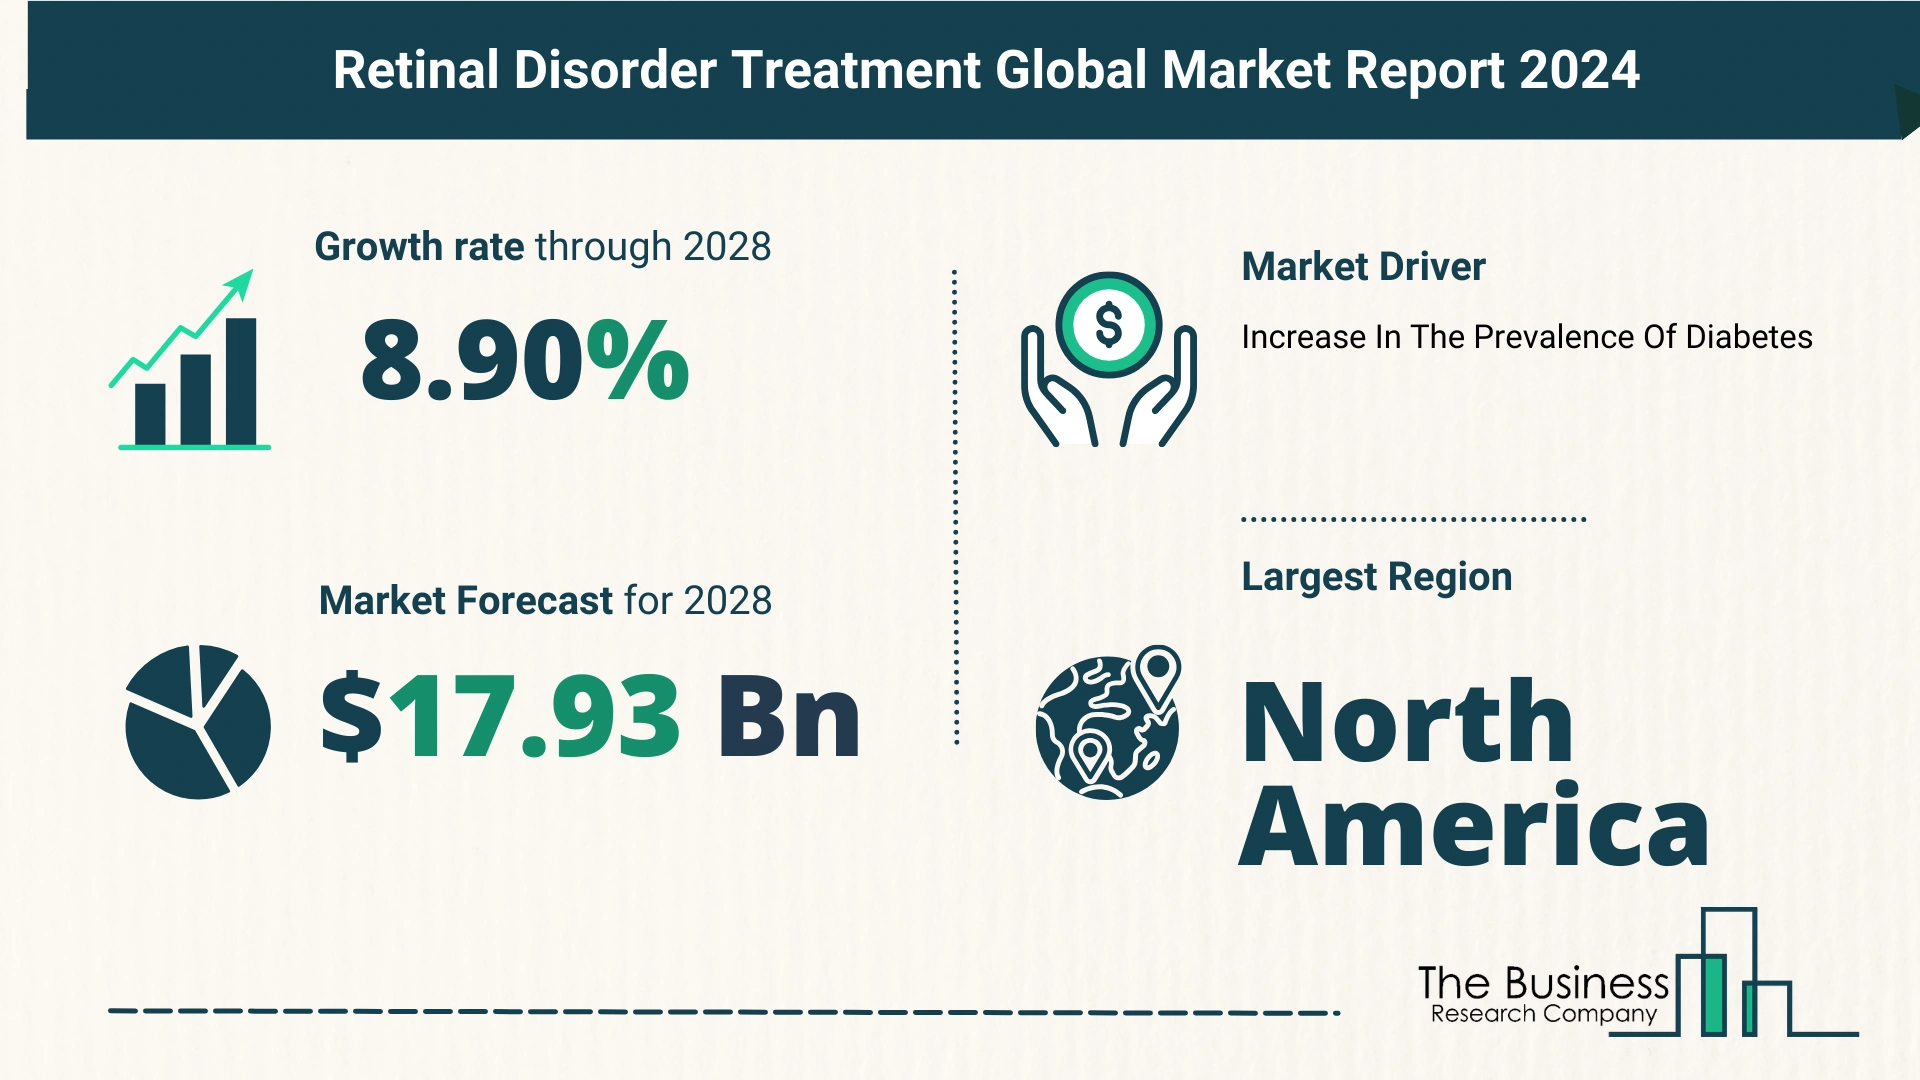 Key Insights On The Retinal Disorder Treatment Market 2024 – Size, Driver, And Major Players